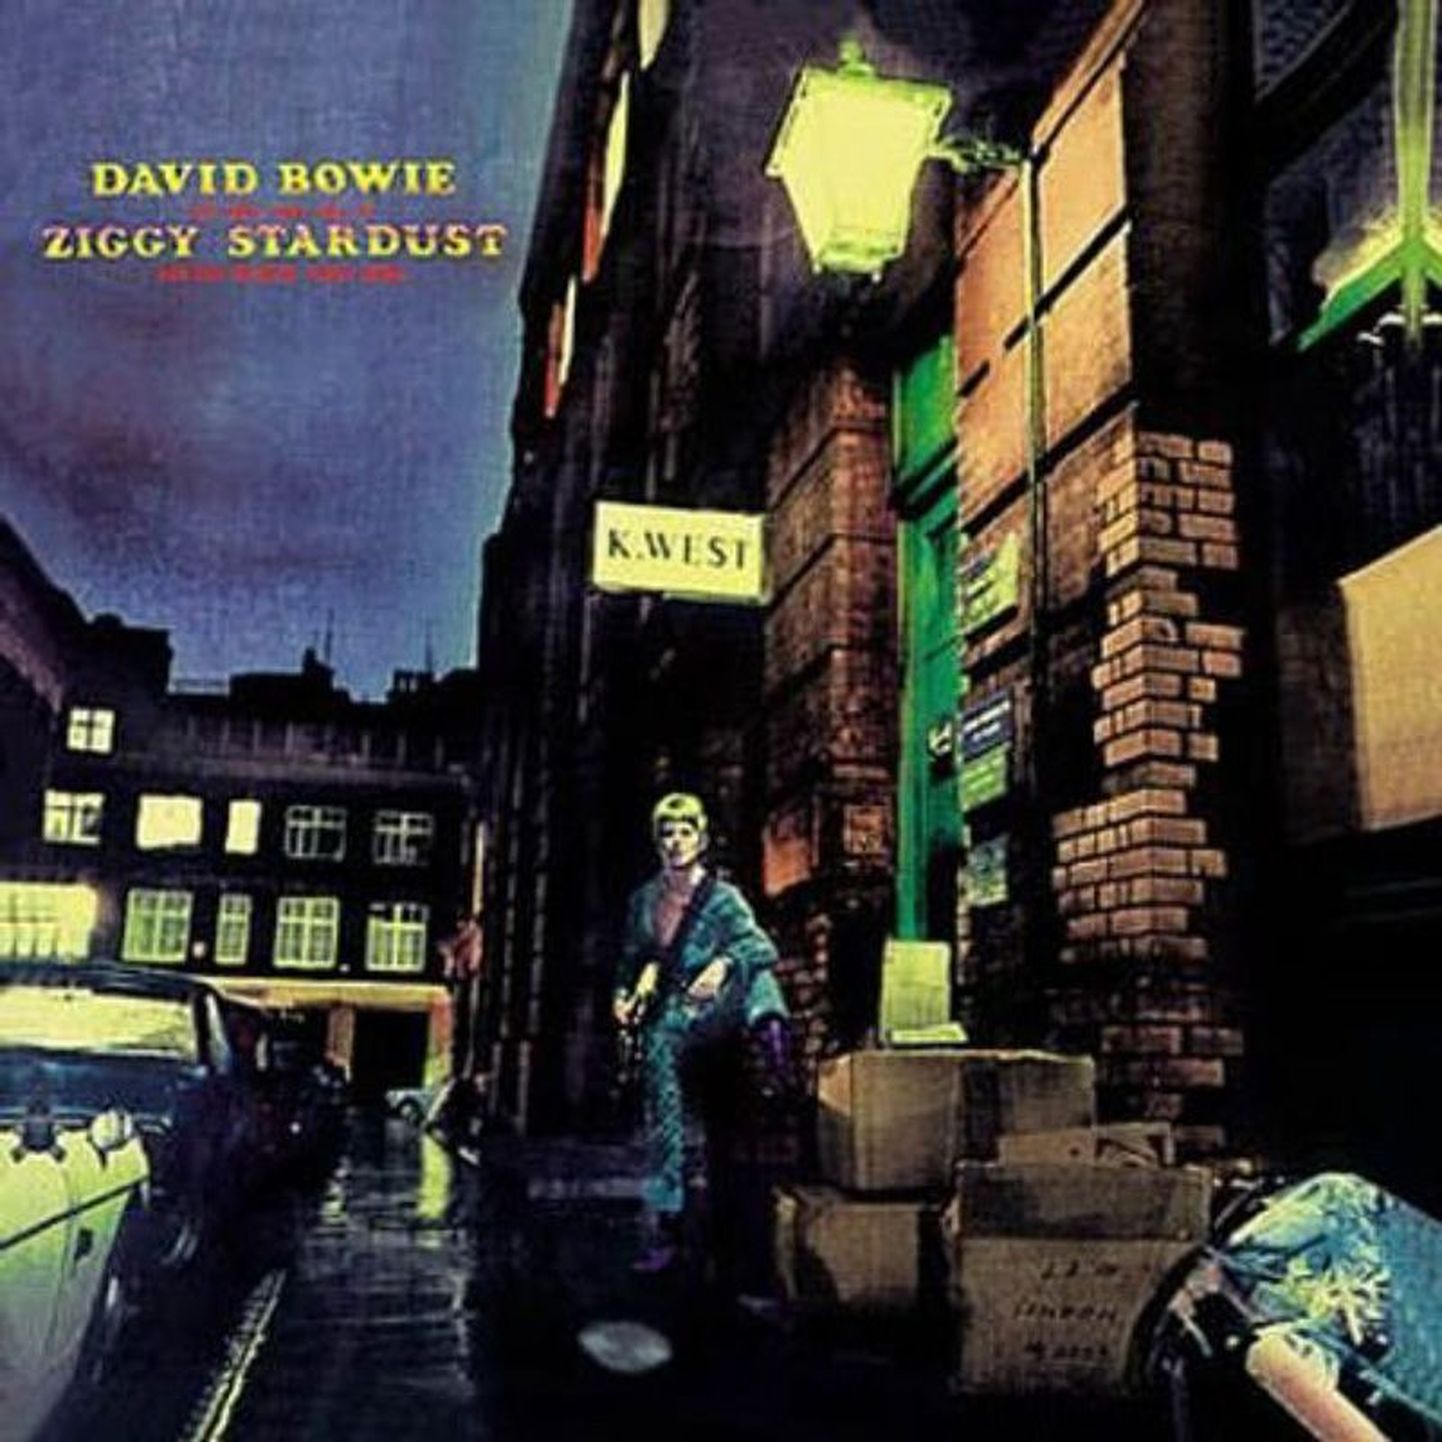 David Bowie “The Rise and Fall of Ziggy Stardust and the Spiders from Mars”